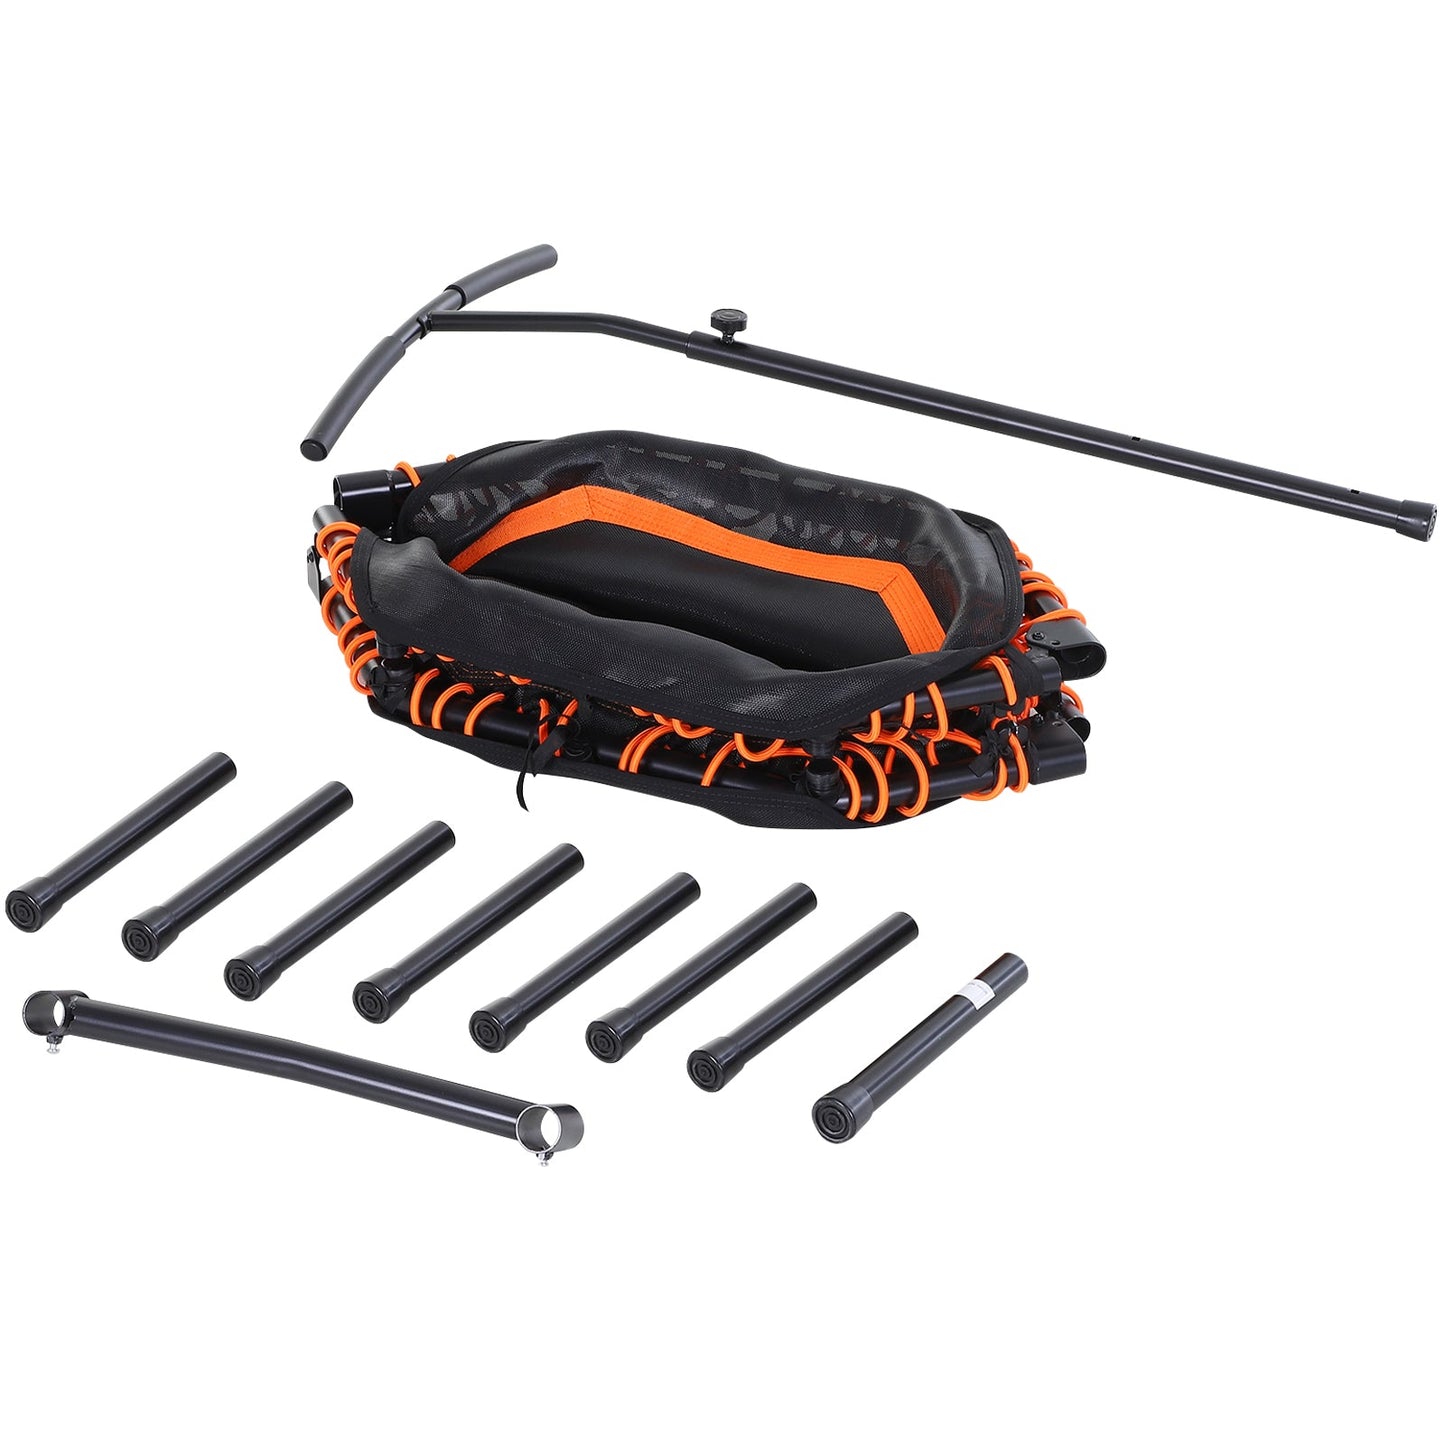 48" Silent Mini Trampoline with Adjustable Handle Bar Fitness Trampoline Bungee Rebounder Jumping Cardio Trainer Workout for Adults or Teens Jump Exercise Equipment Orange - Gallery Canada